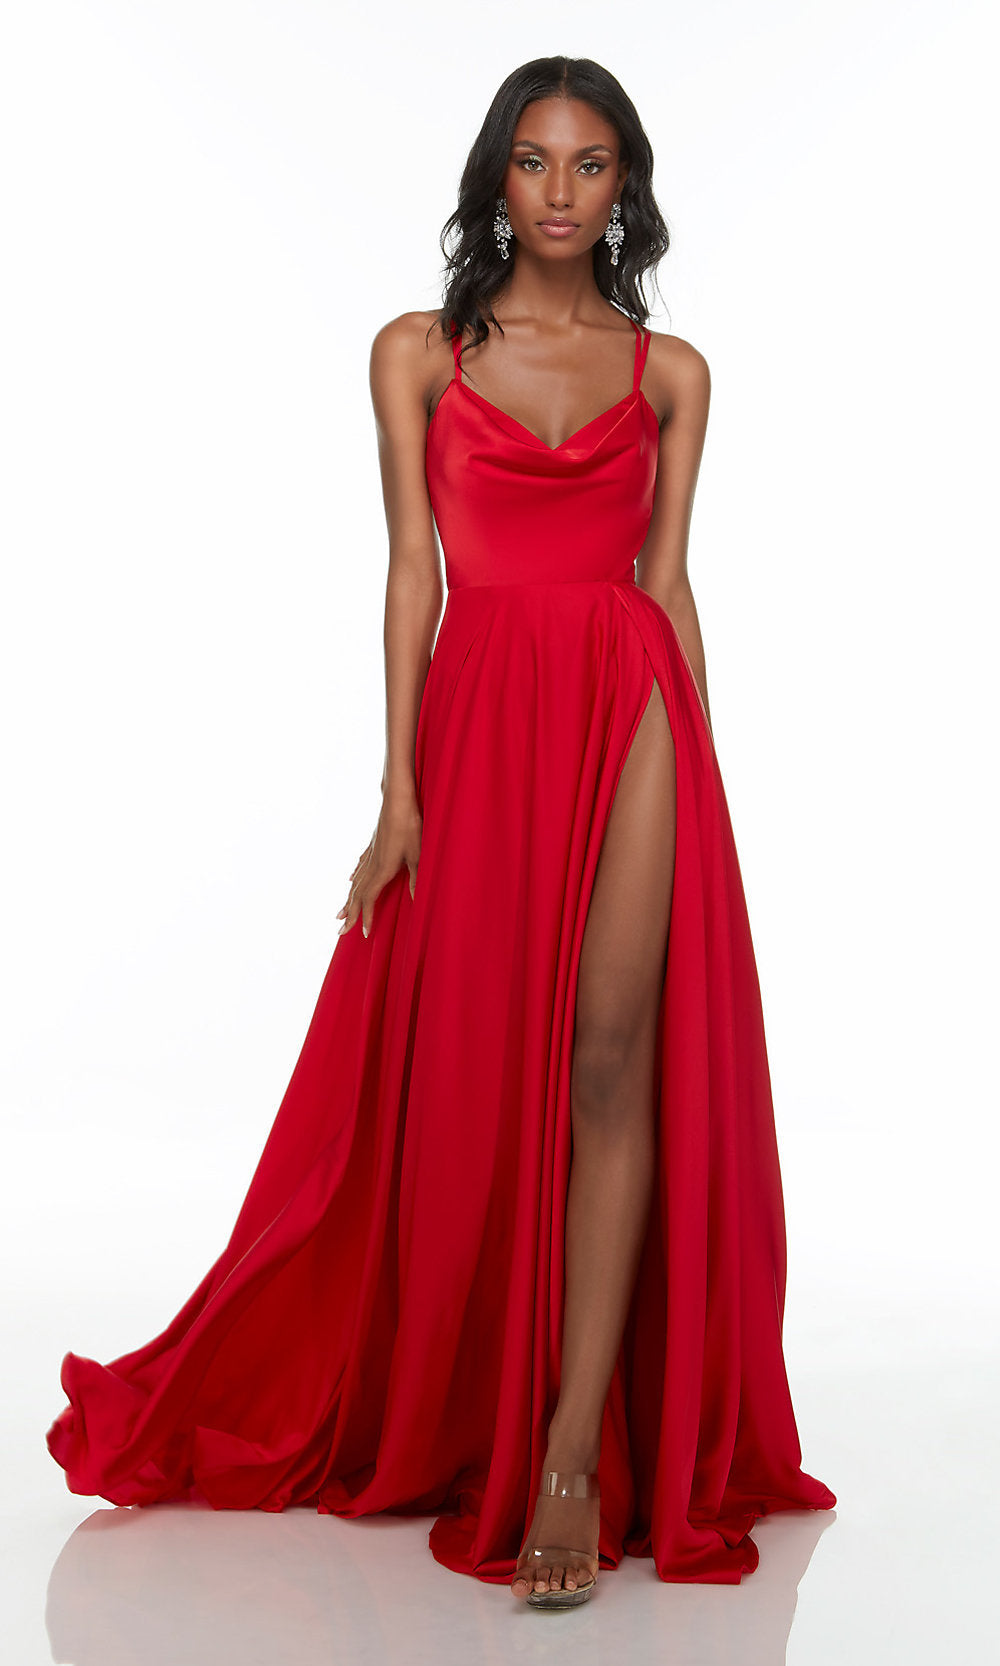 Strappy-Back Alyce Long Red Prom Dress - PromGirl